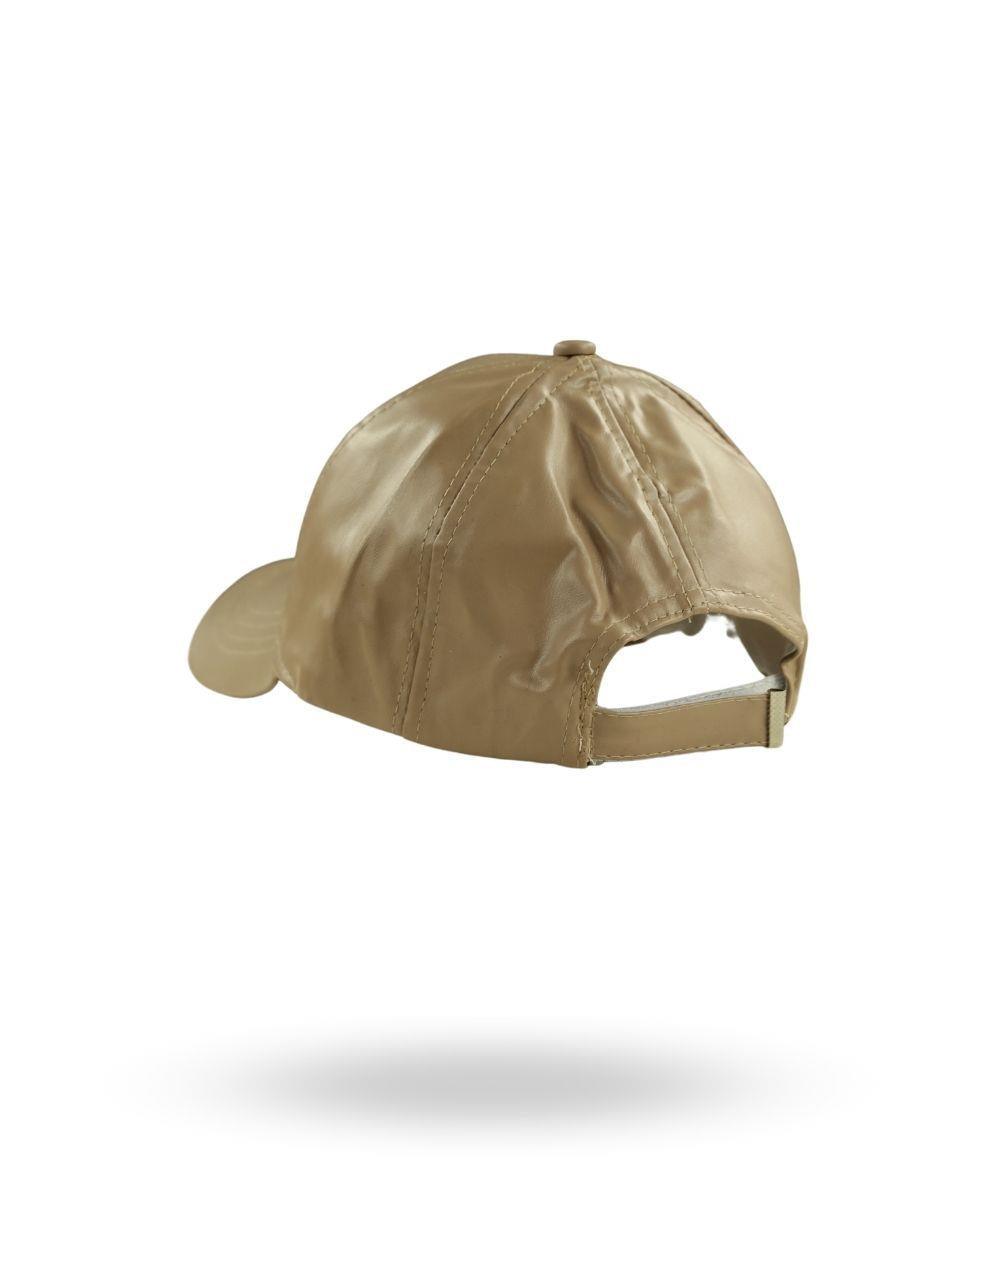 Basic Leather Covered Street Style Hat Bronze - STREET MODE ™